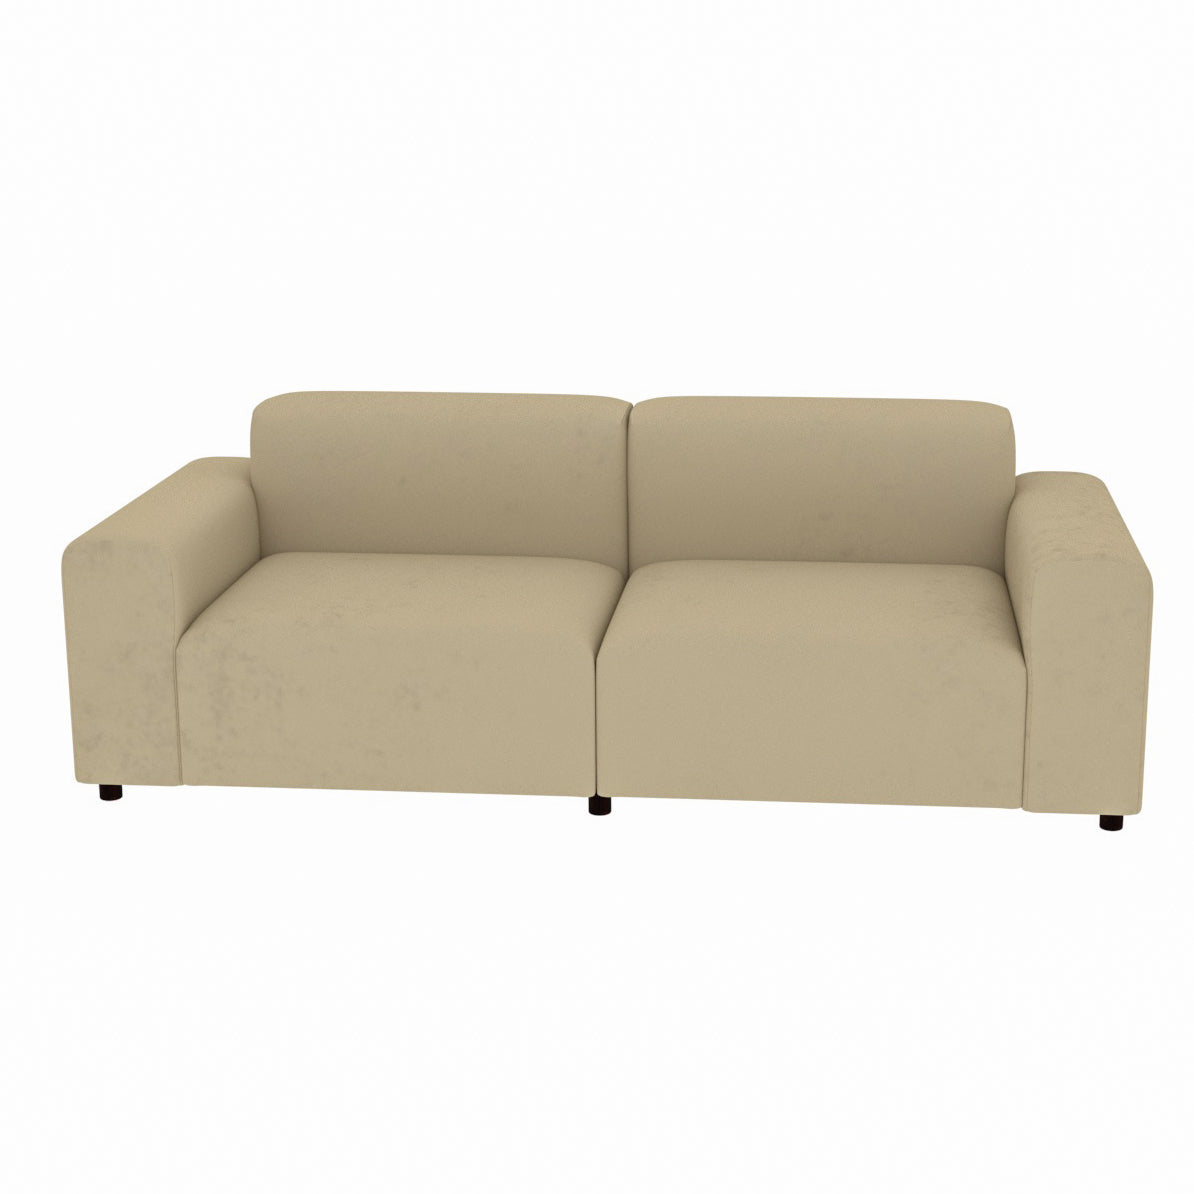 Premium Soft Touch Comfort 2 Seater Sofa for Living Room Sofa